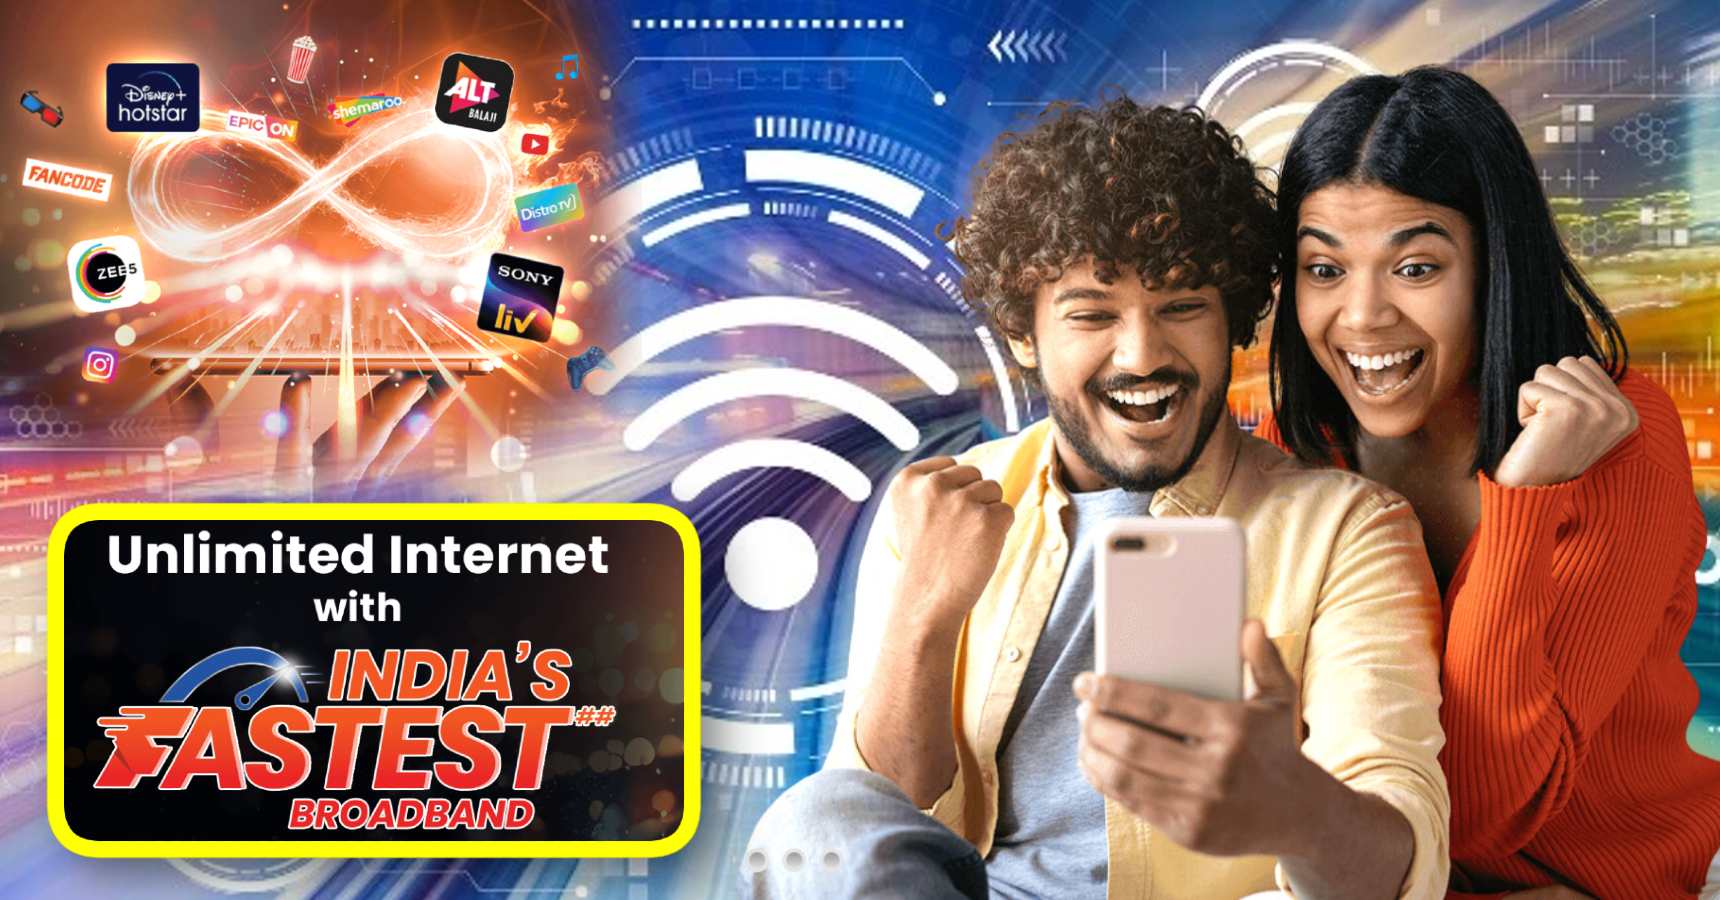 Excitel High Speed Brodband with 400 Mbps Unlimited Internet 21 Free OTT Apps and TV channels